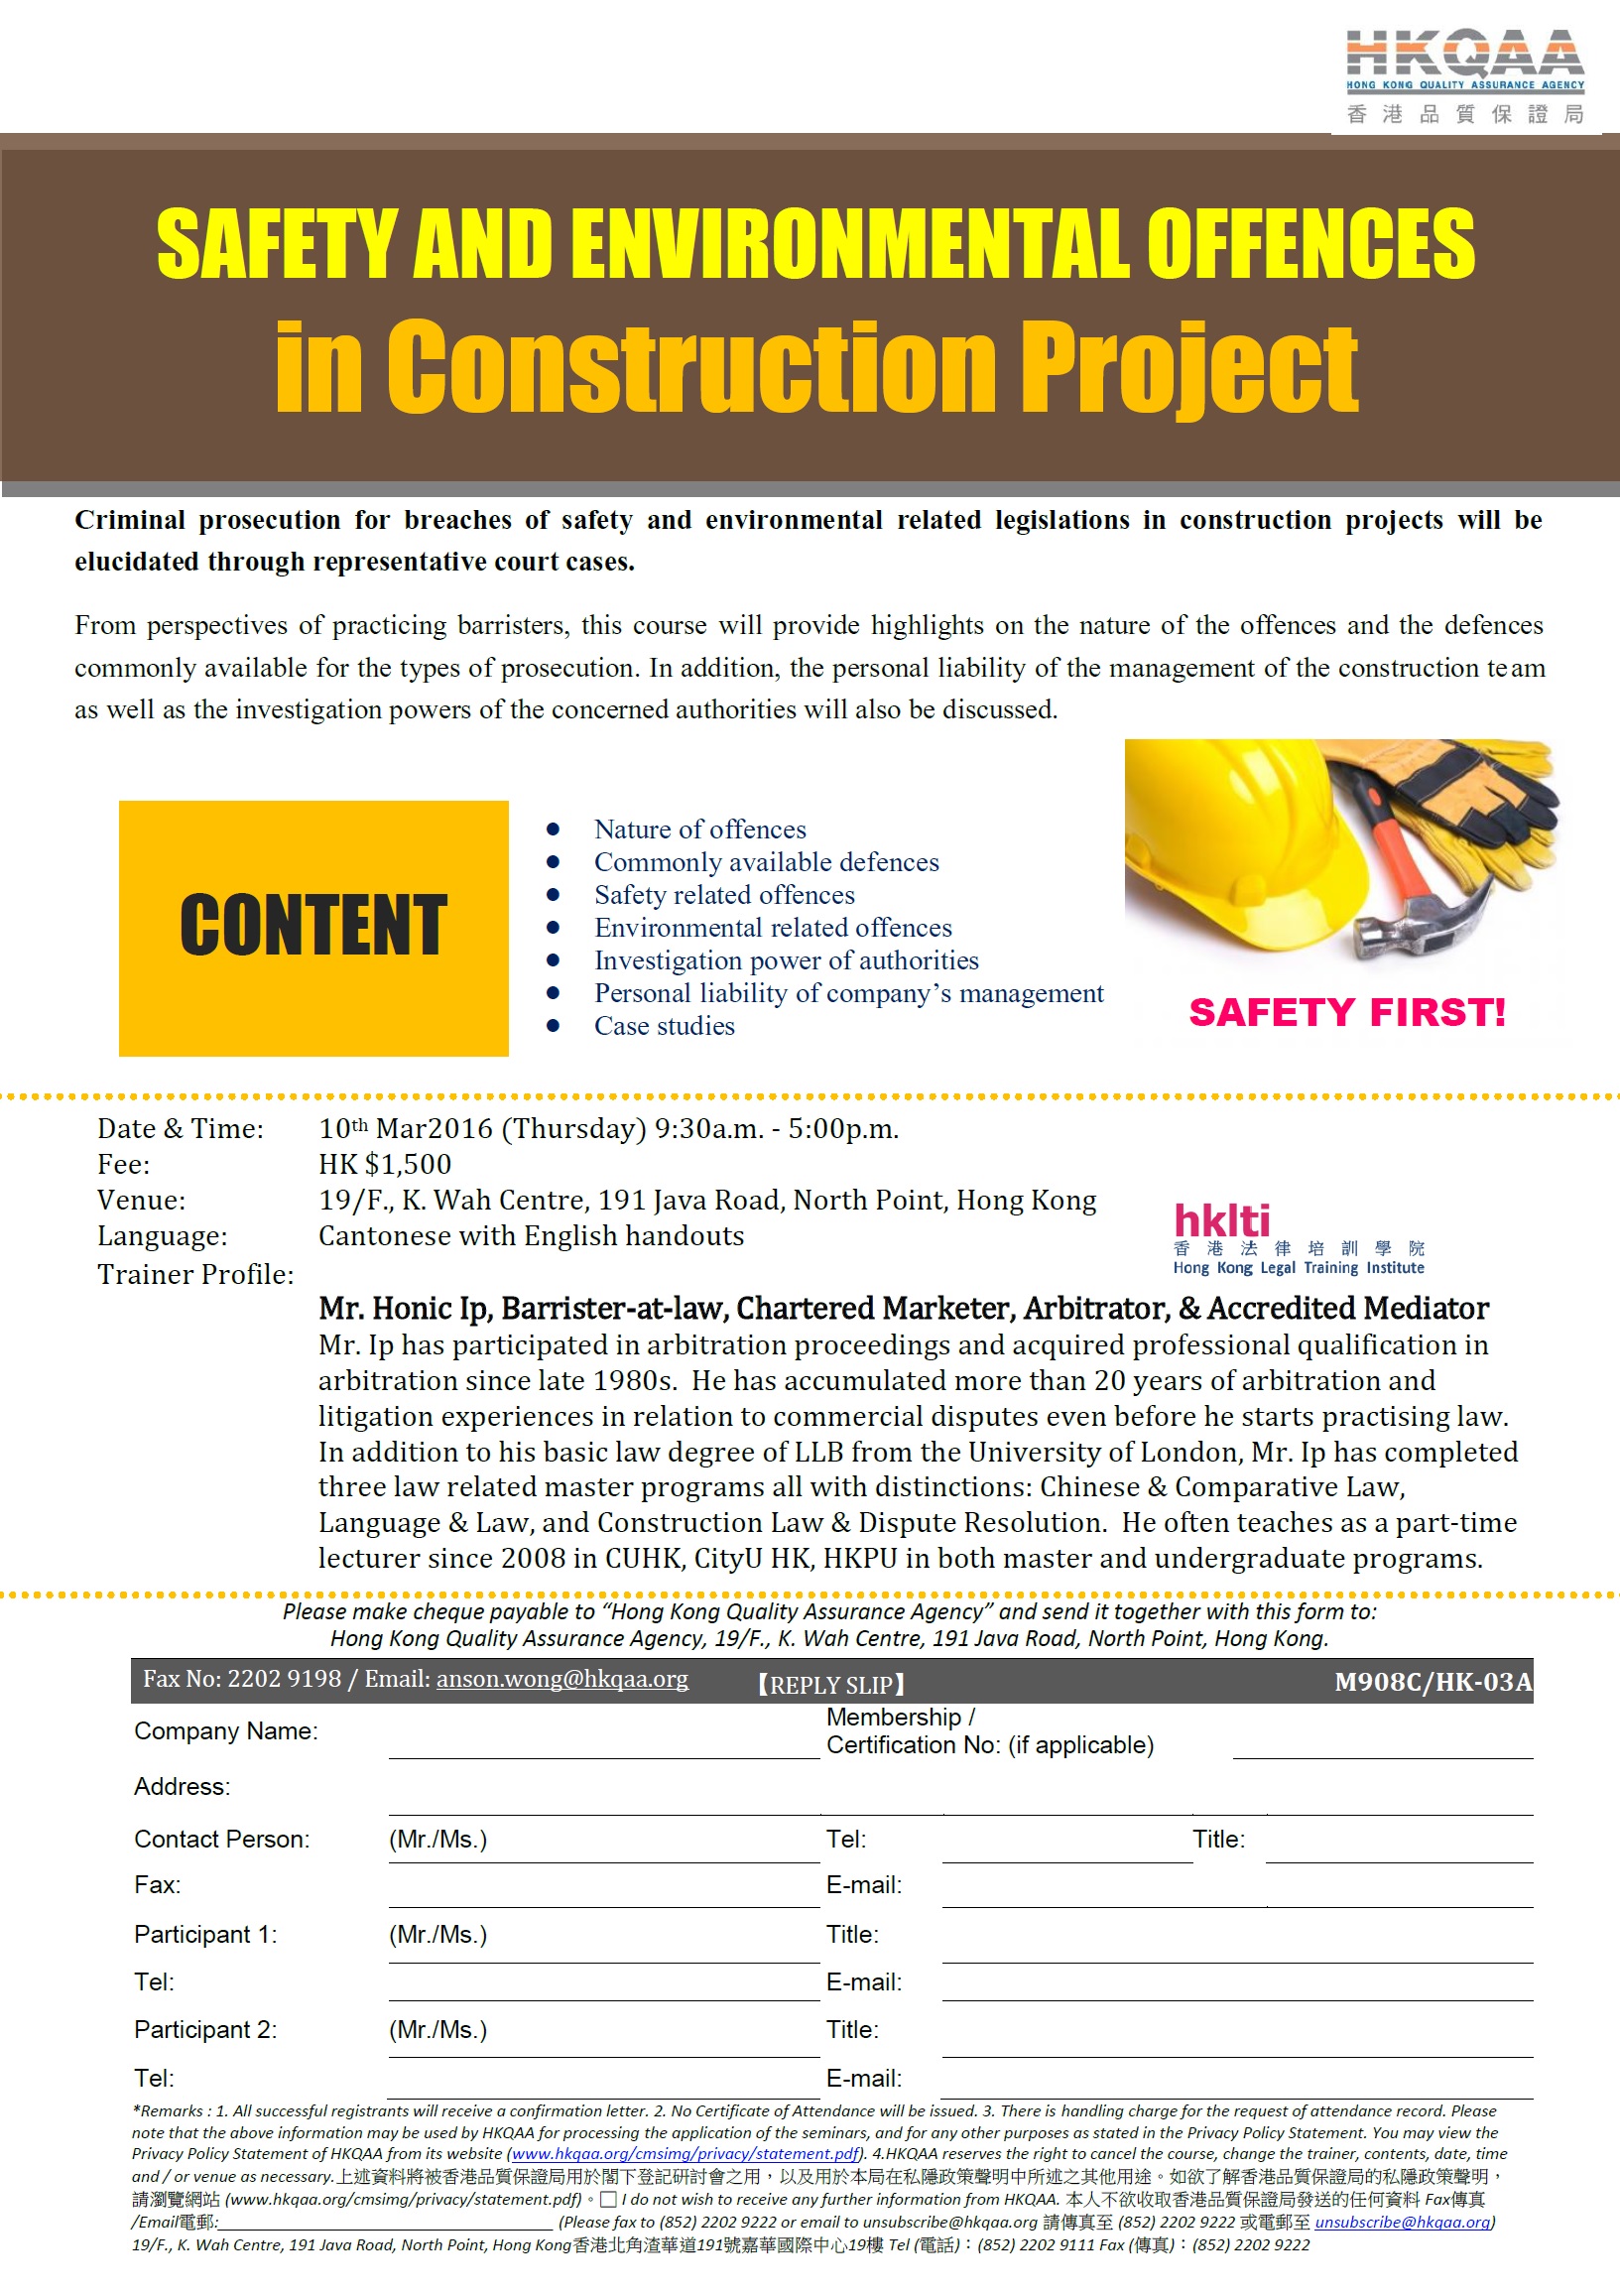 hklti hkqaa Safety and Environmental Offences in Construction Projectl 20160310